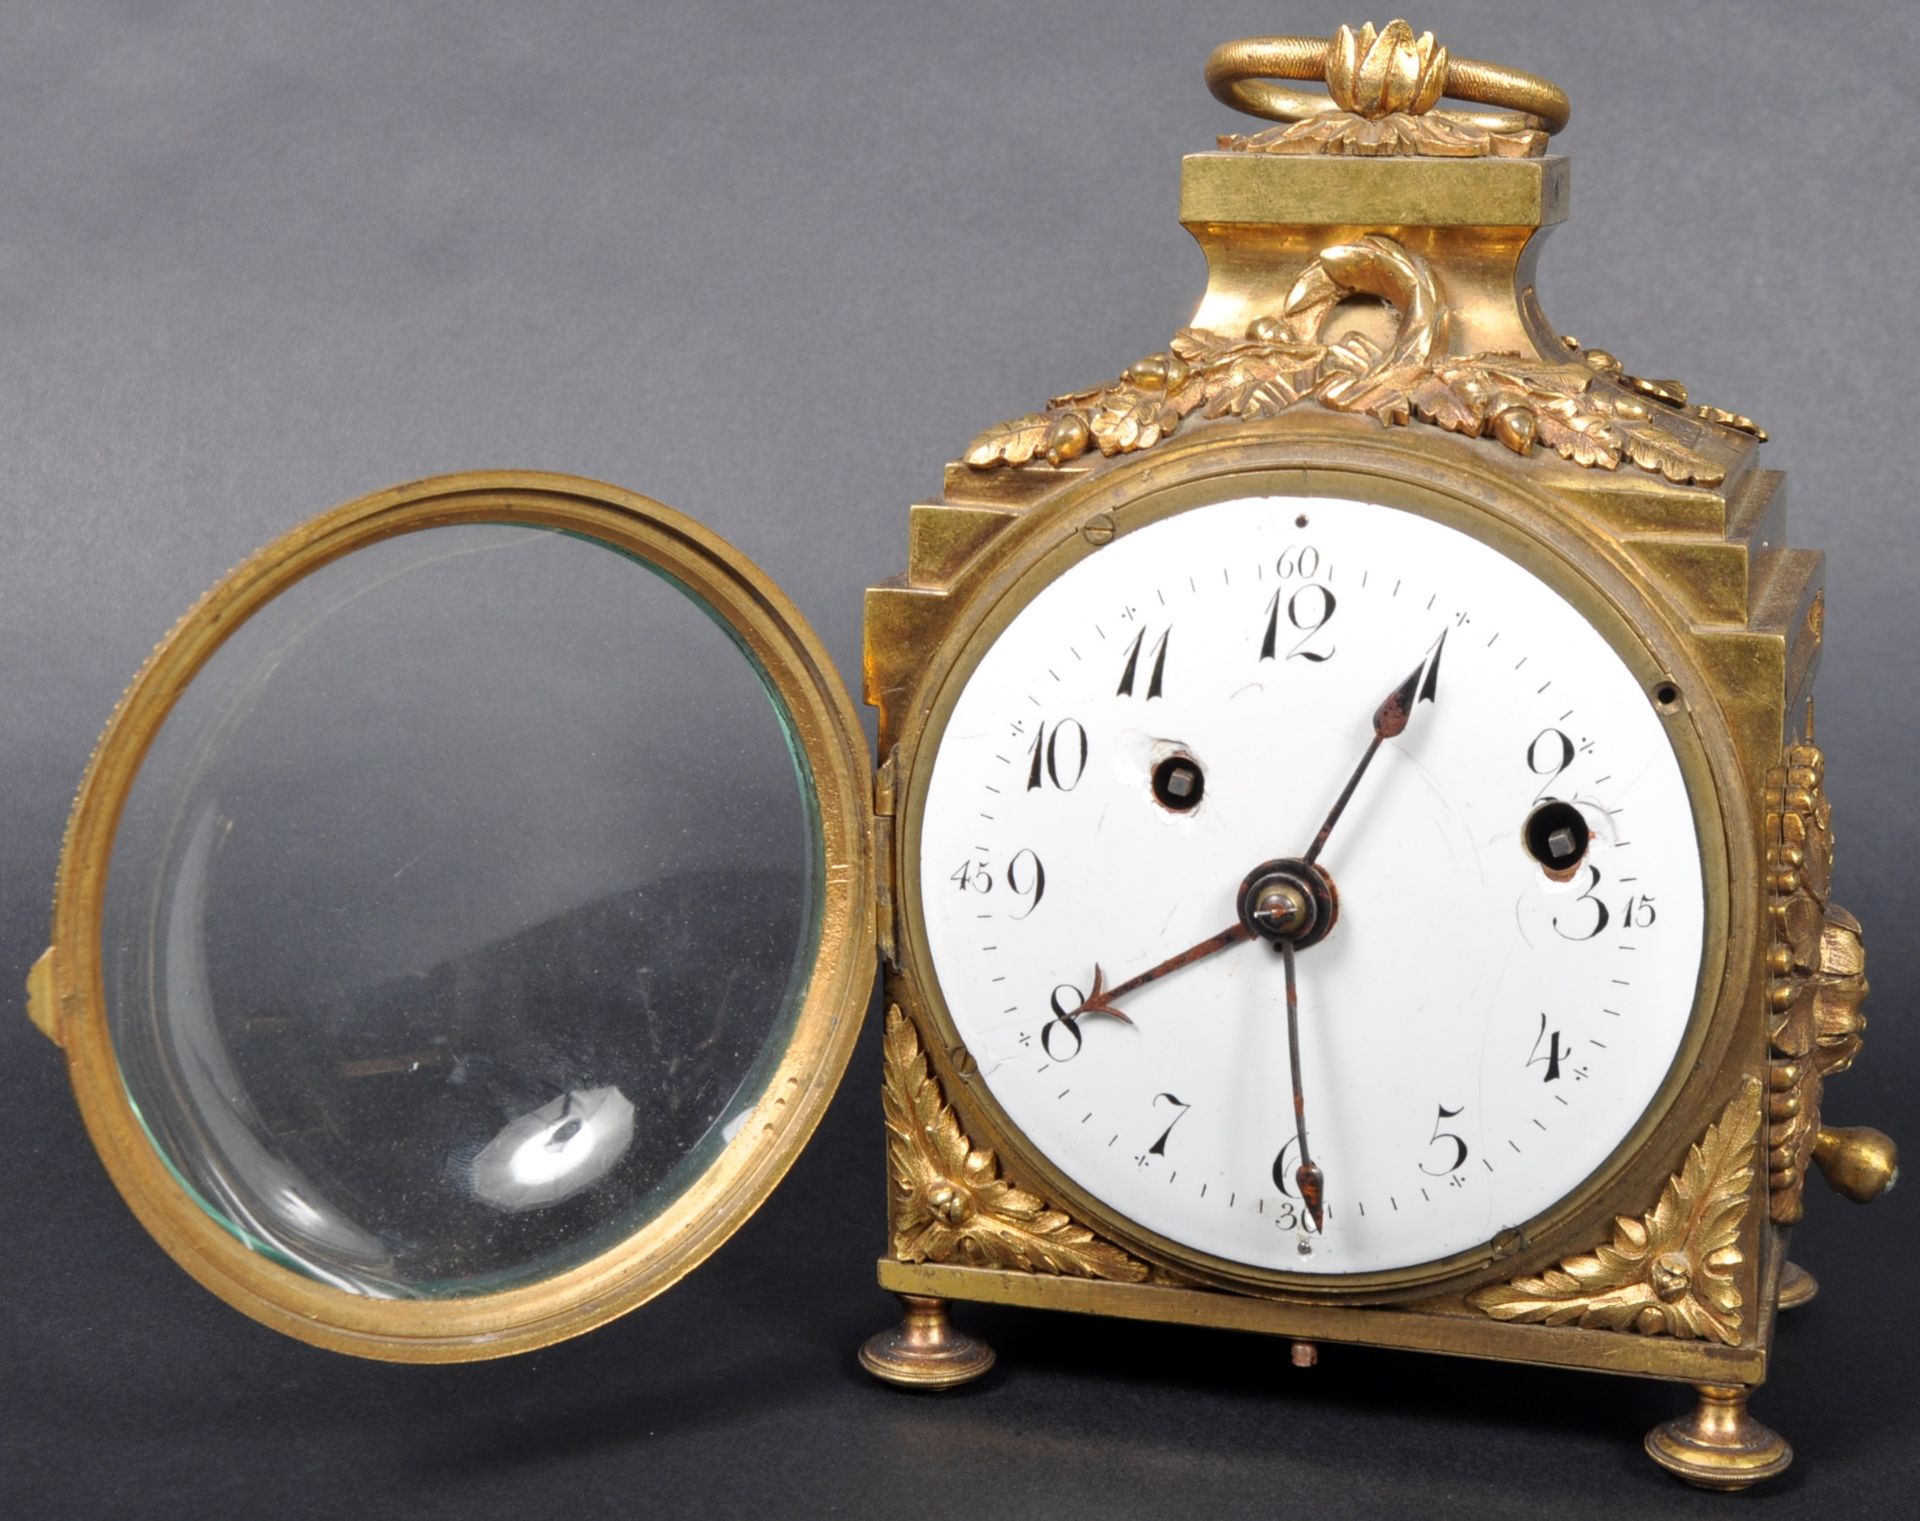 LATE 18TH CENTURY FRENCH PENDULE D'OFFICIER CLOCK - Image 4 of 9